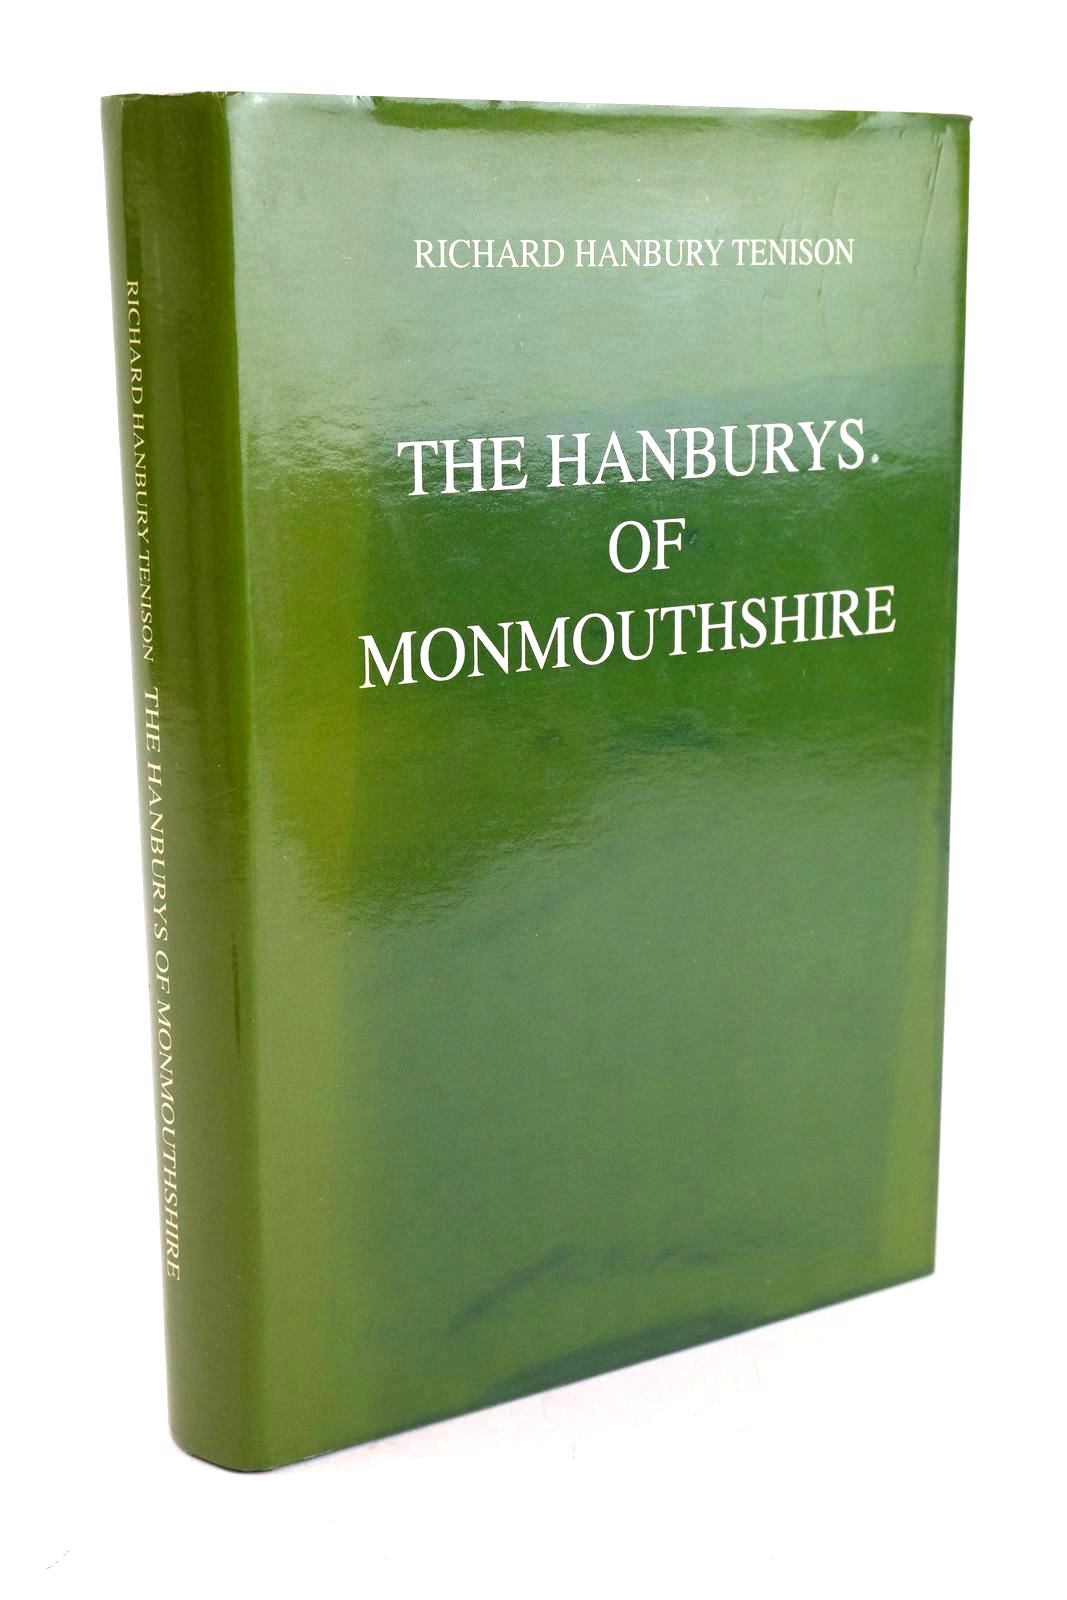 Photo of THE HANBURYS OF MONMOUTHSHIRE written by Tenison, Richard Hanbury published by The National Library of Wales (STOCK CODE: 1327160)  for sale by Stella & Rose's Books